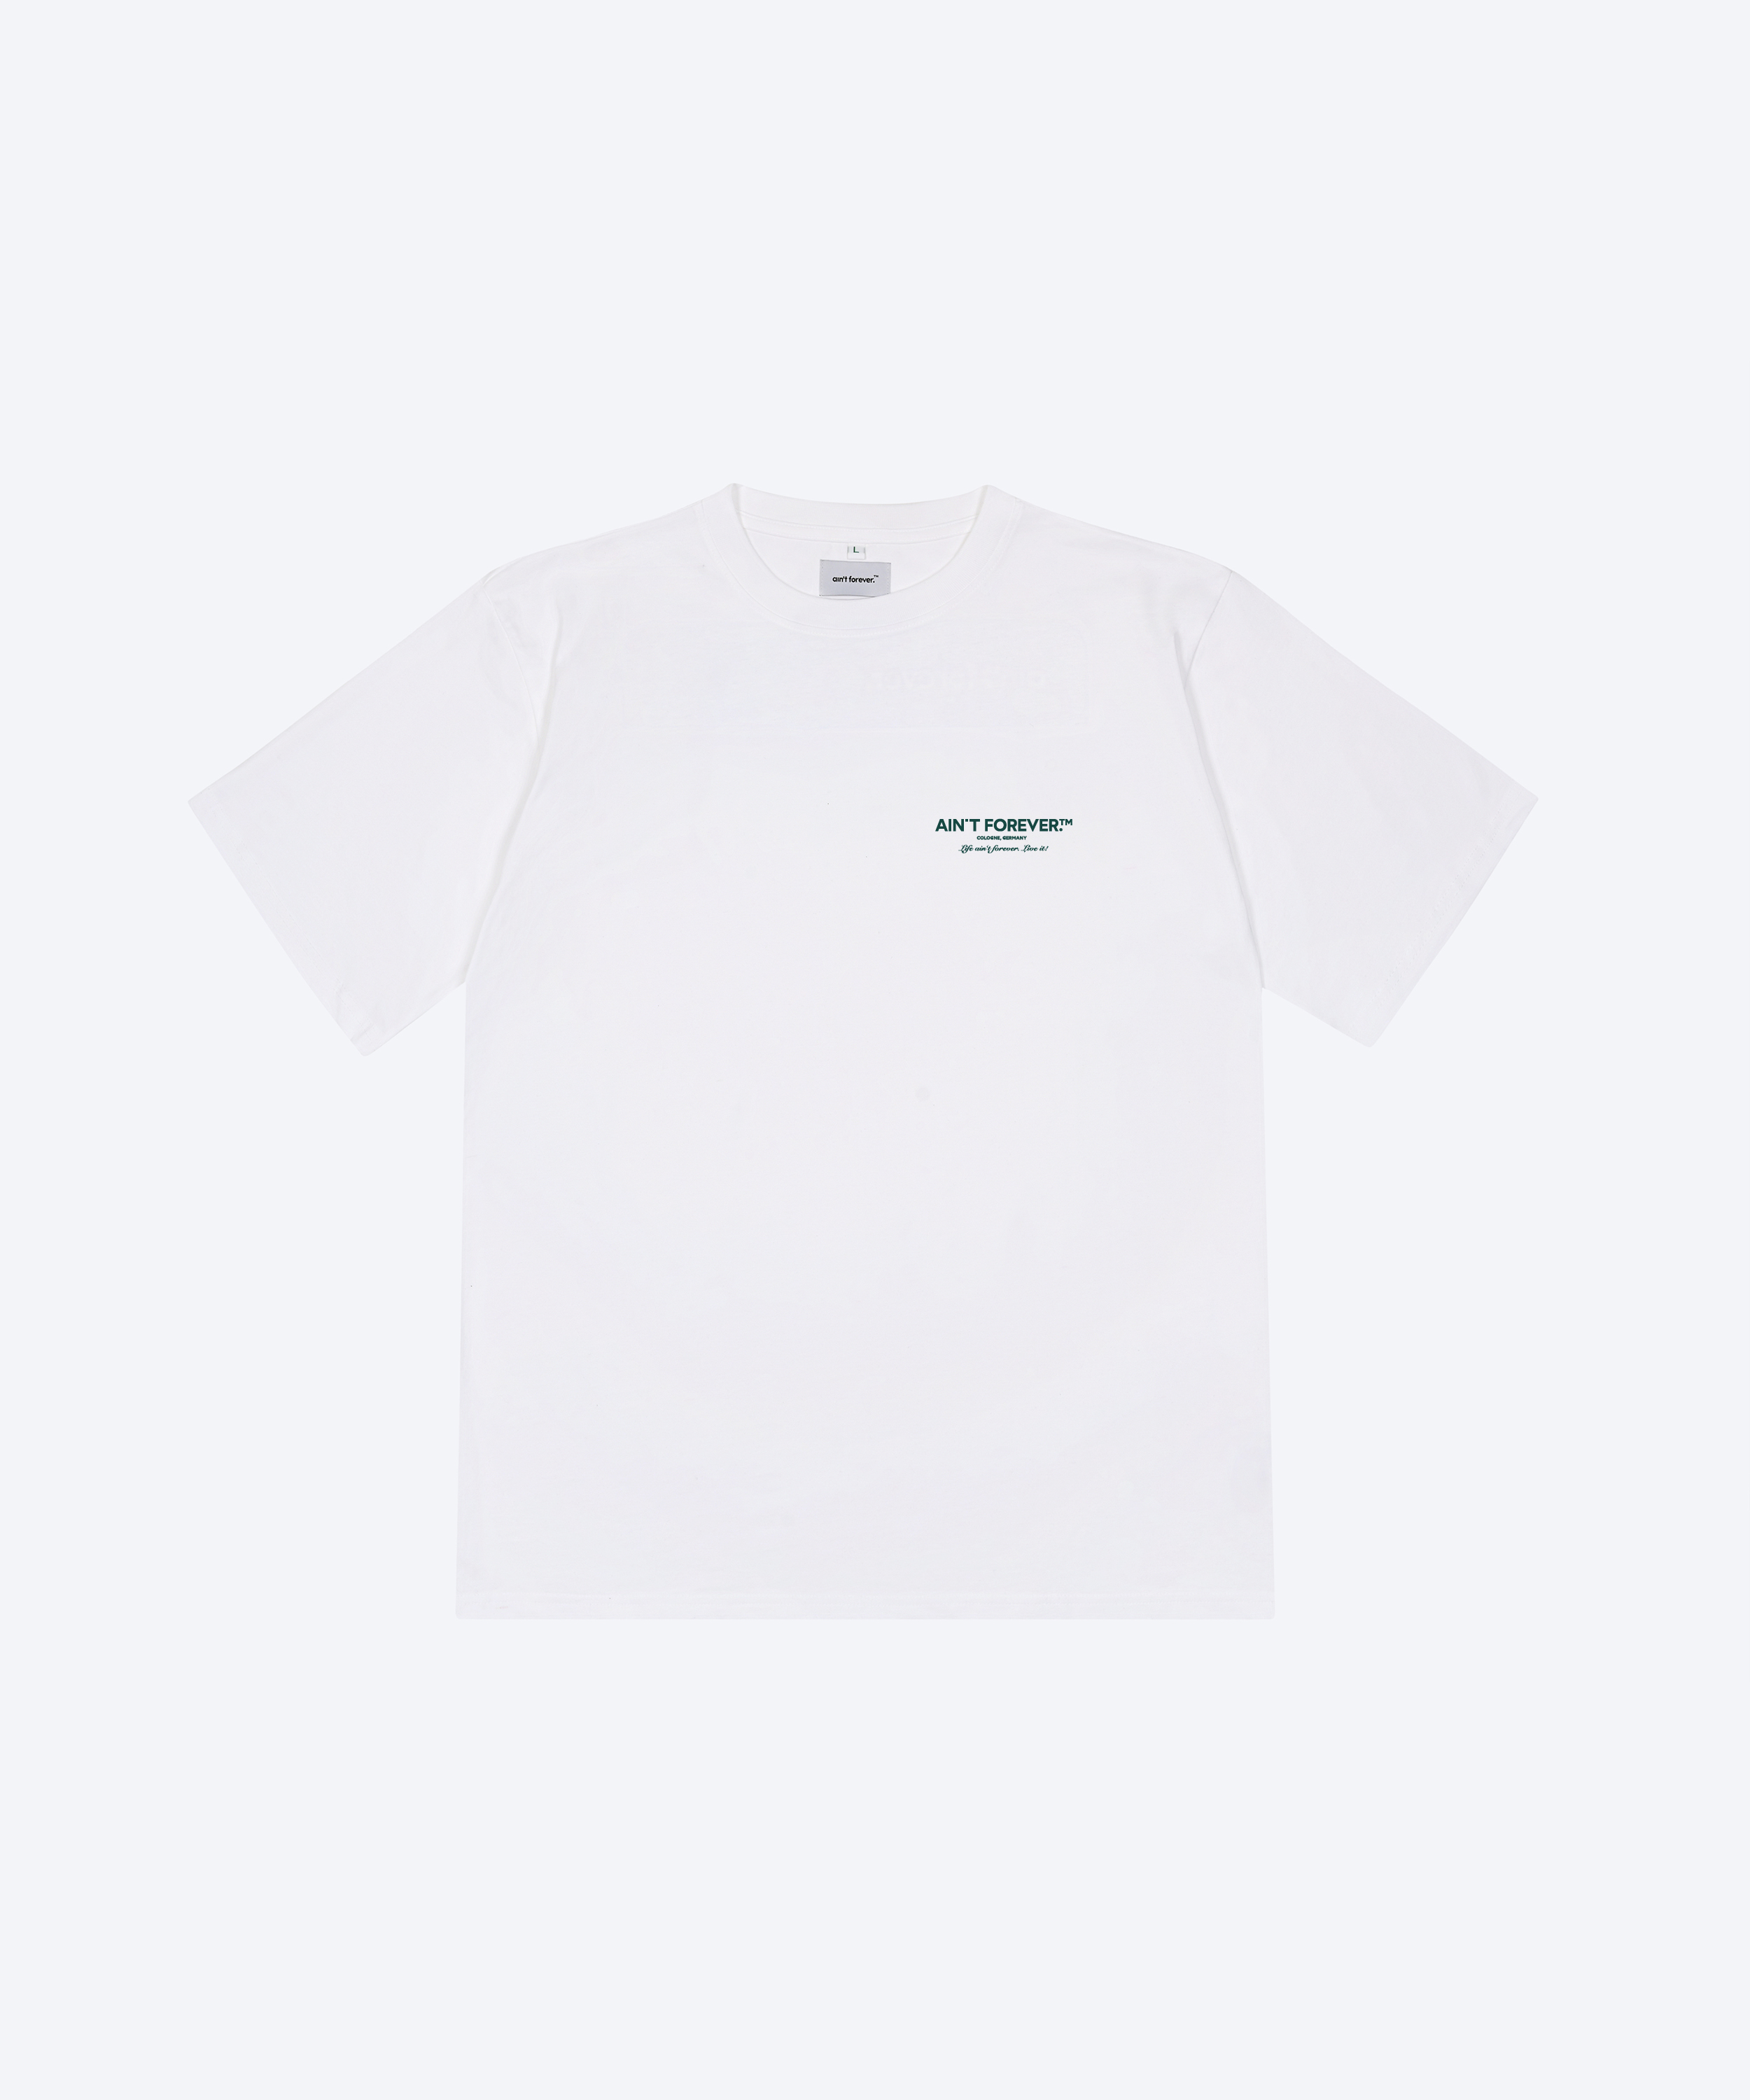 THE LIVE IT! T-SHIRT (WHITE / GREEN)